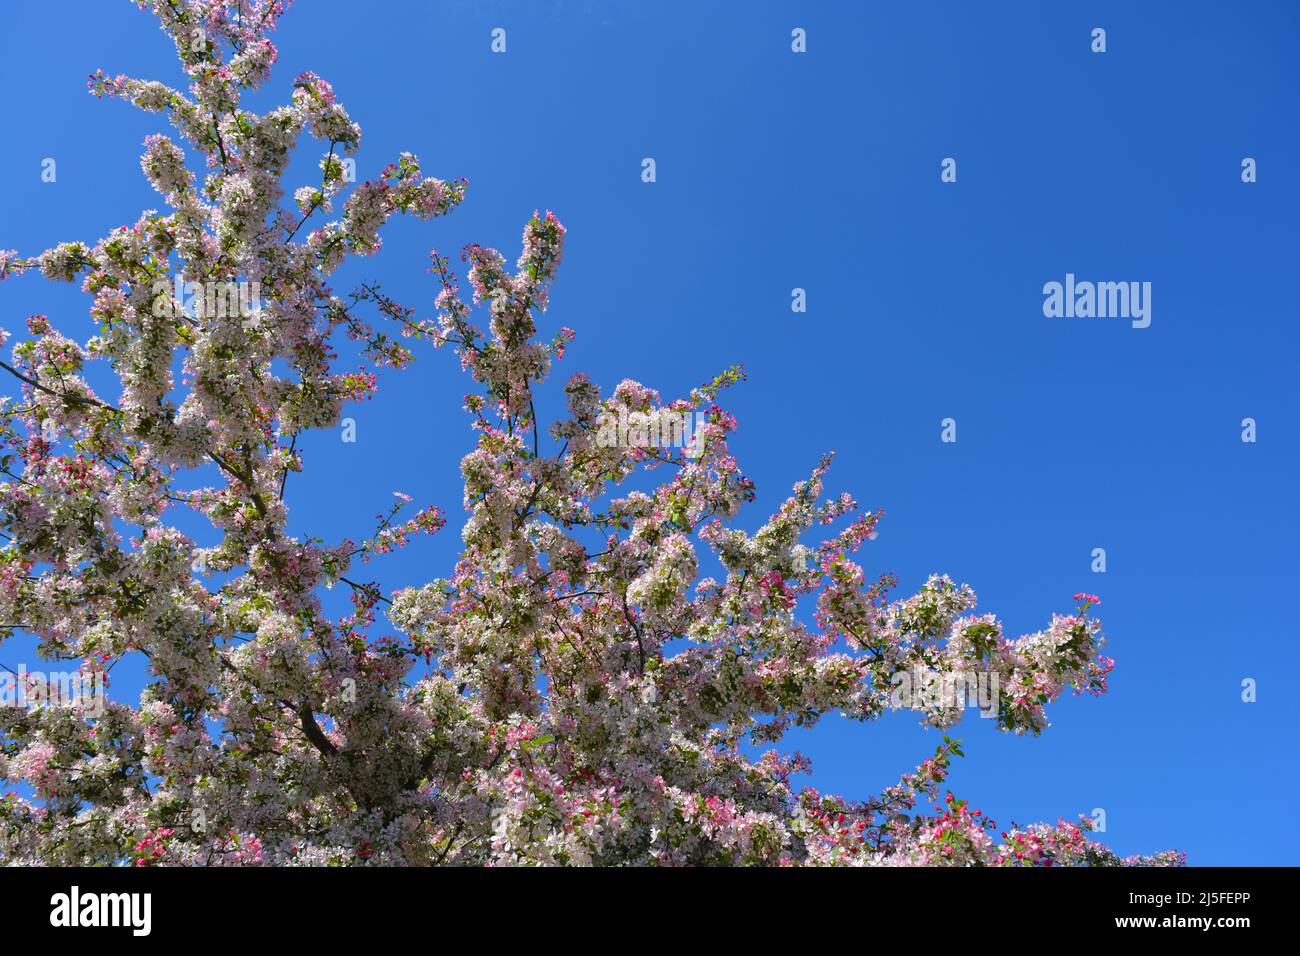 Crab apple, also known as Malus floribunda, blossom on branch against blue sky with copy space Stock Photo